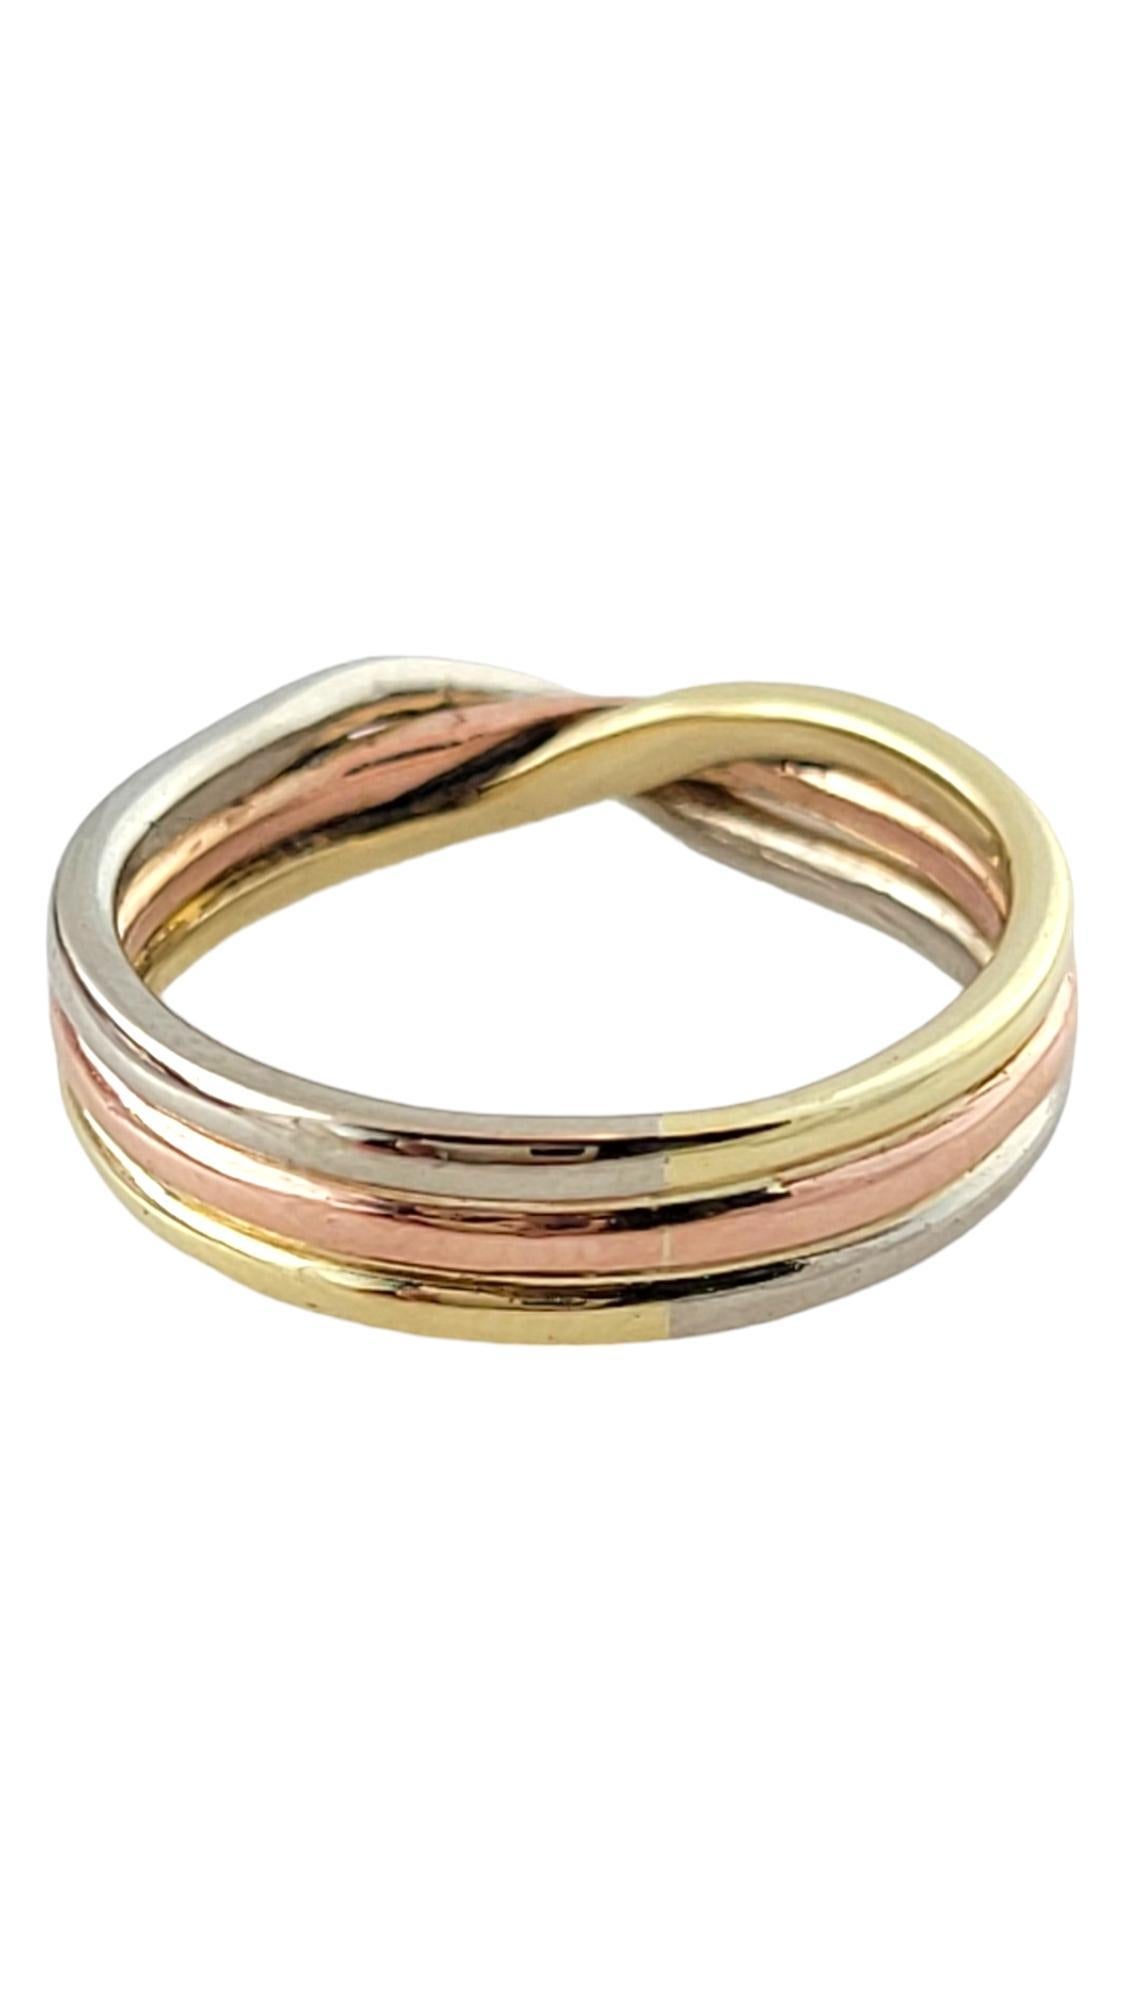 14K Tri Colored Three Band Ring Size 5.25-5.5 #17335 In Good Condition For Sale In Washington Depot, CT